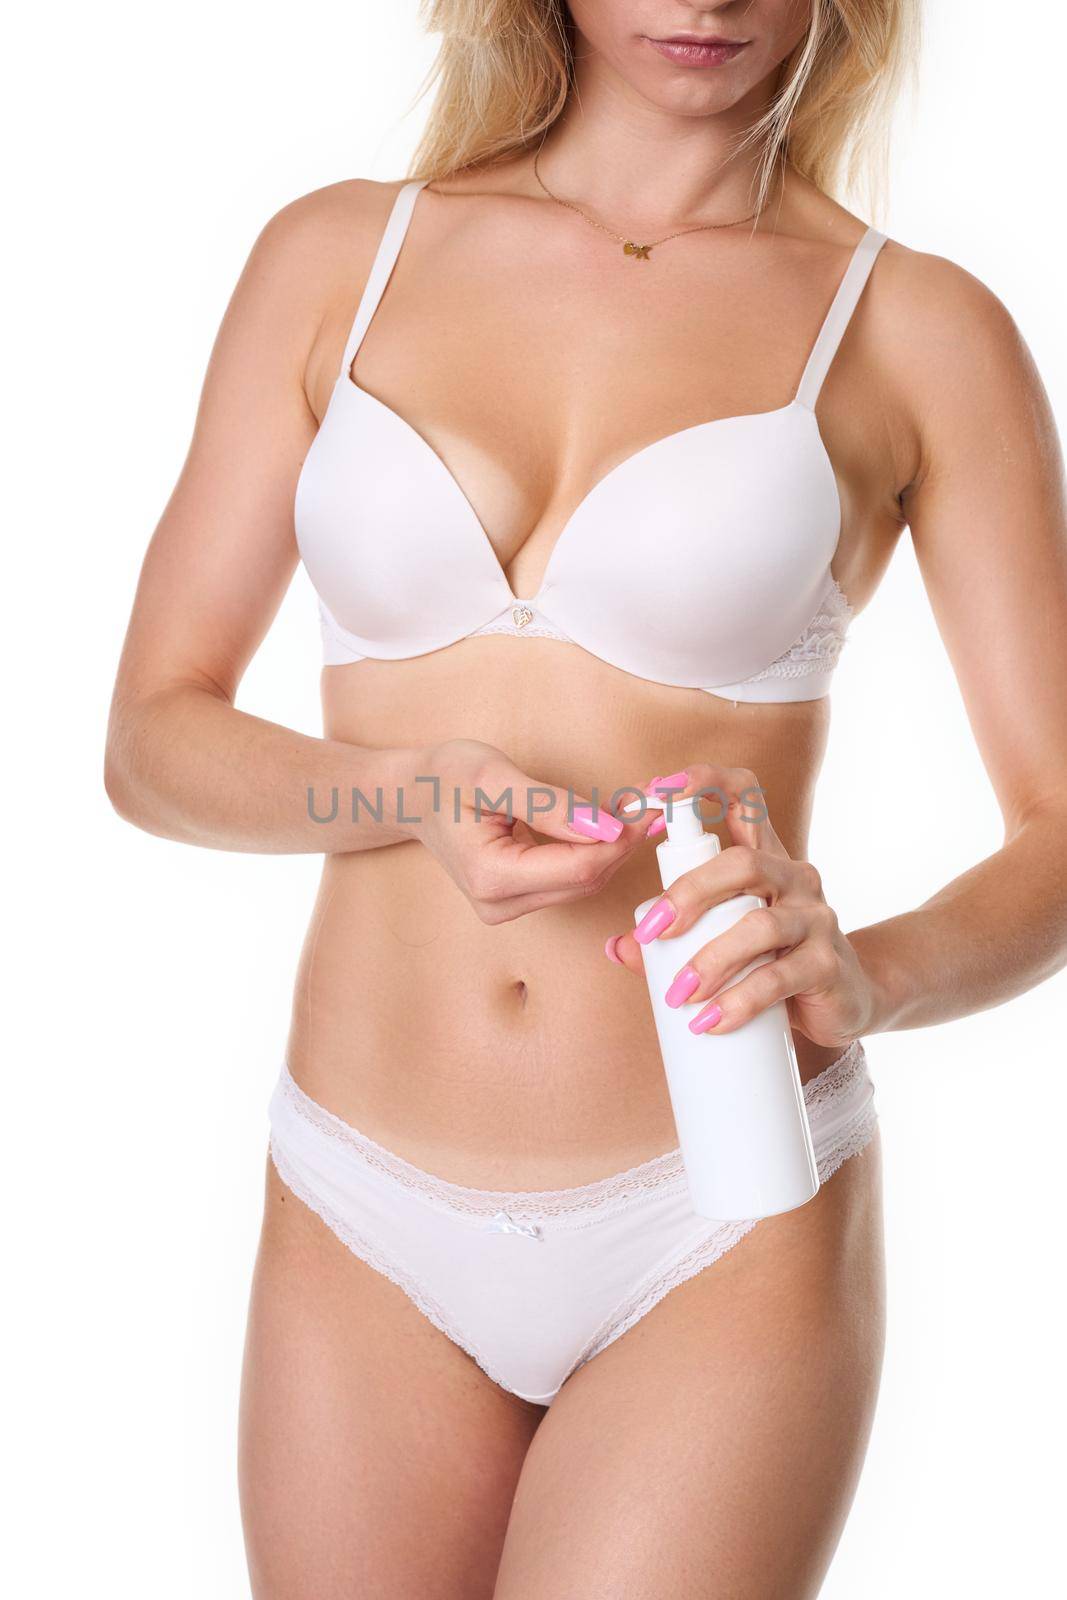 blonde haired woman uses body lotion. studio photography on a white background by Jarosz